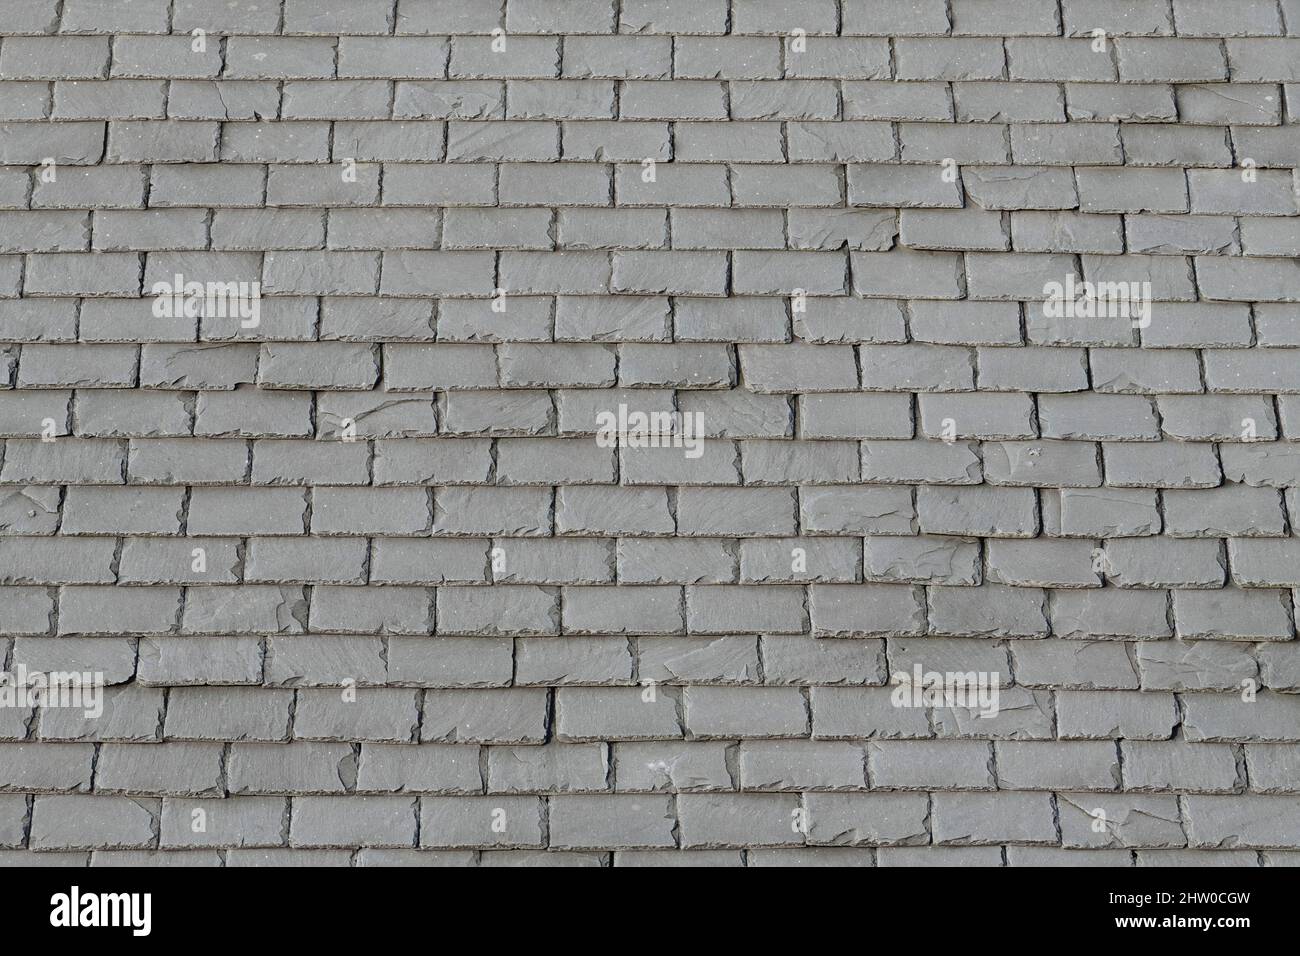 Rows of Grey Slate Roofing Tiles on a Frosty Roof Stock Photo